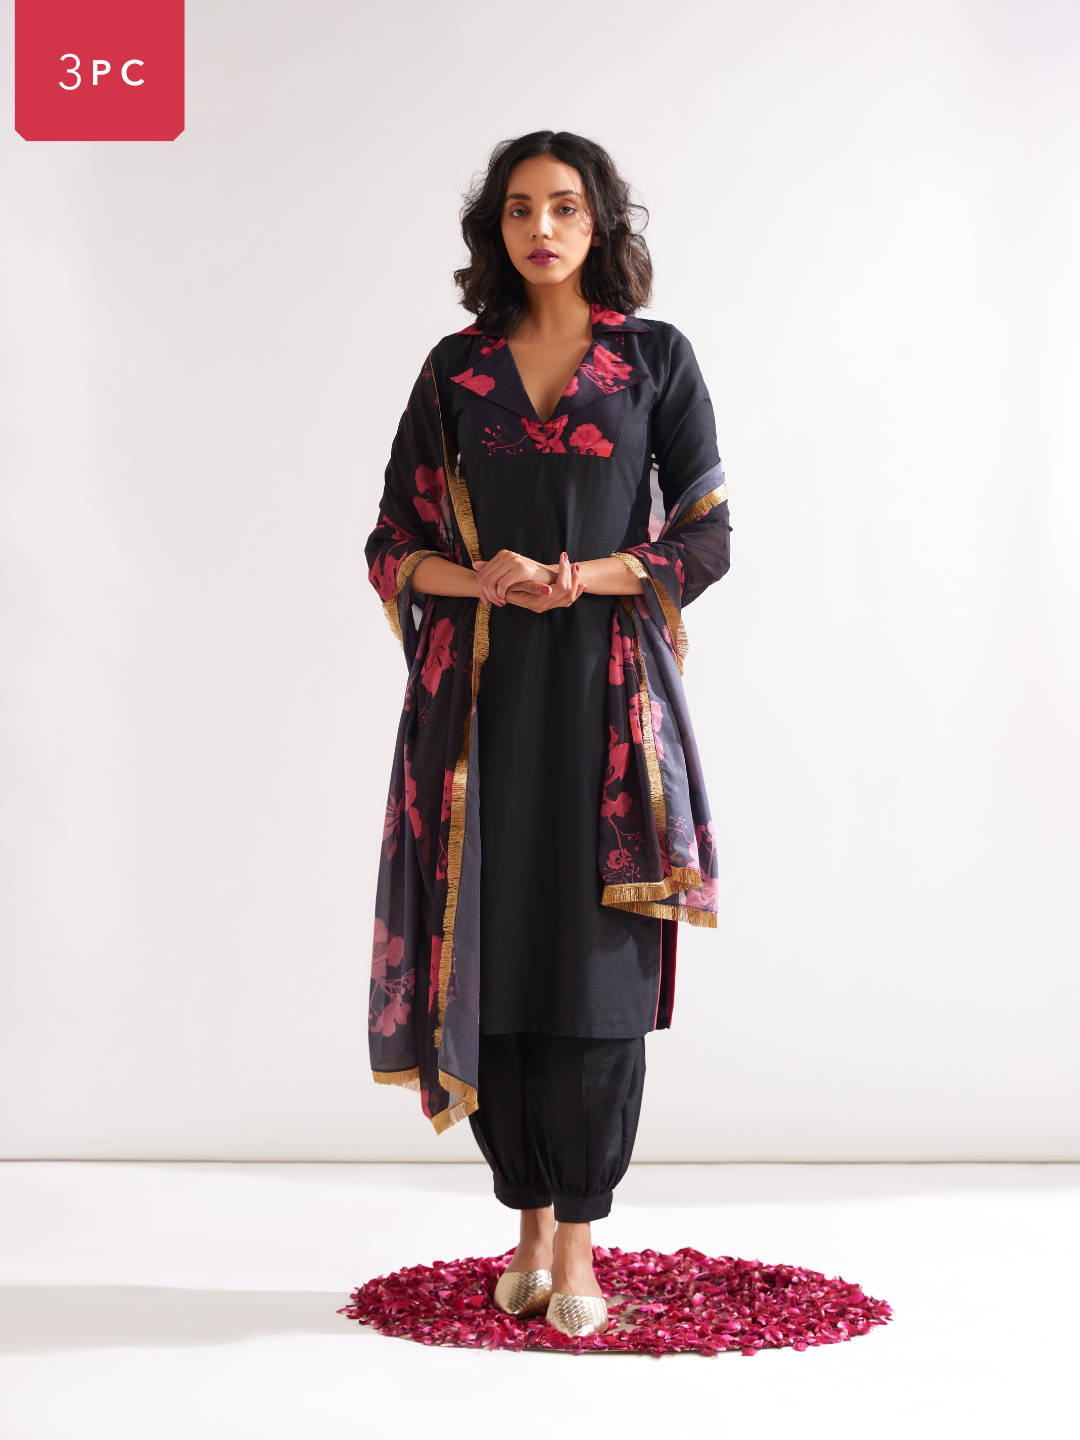 Gulmohar lapel collared straight kurta paired with pathani pants along with dupatta- Rich black